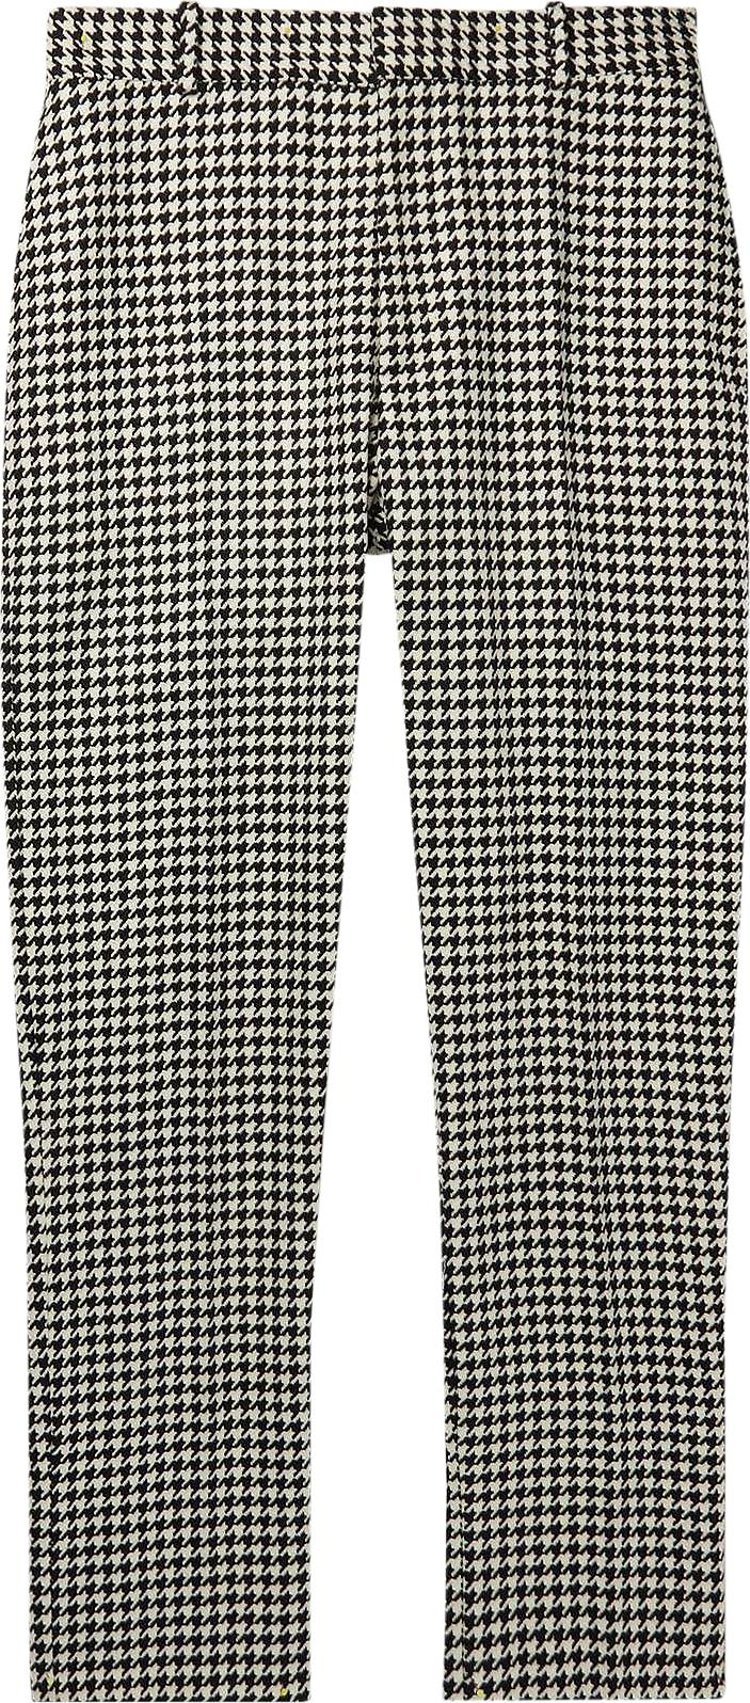 Alexander McQueen Dogtooth Cigarette Trousers 'Black/White'